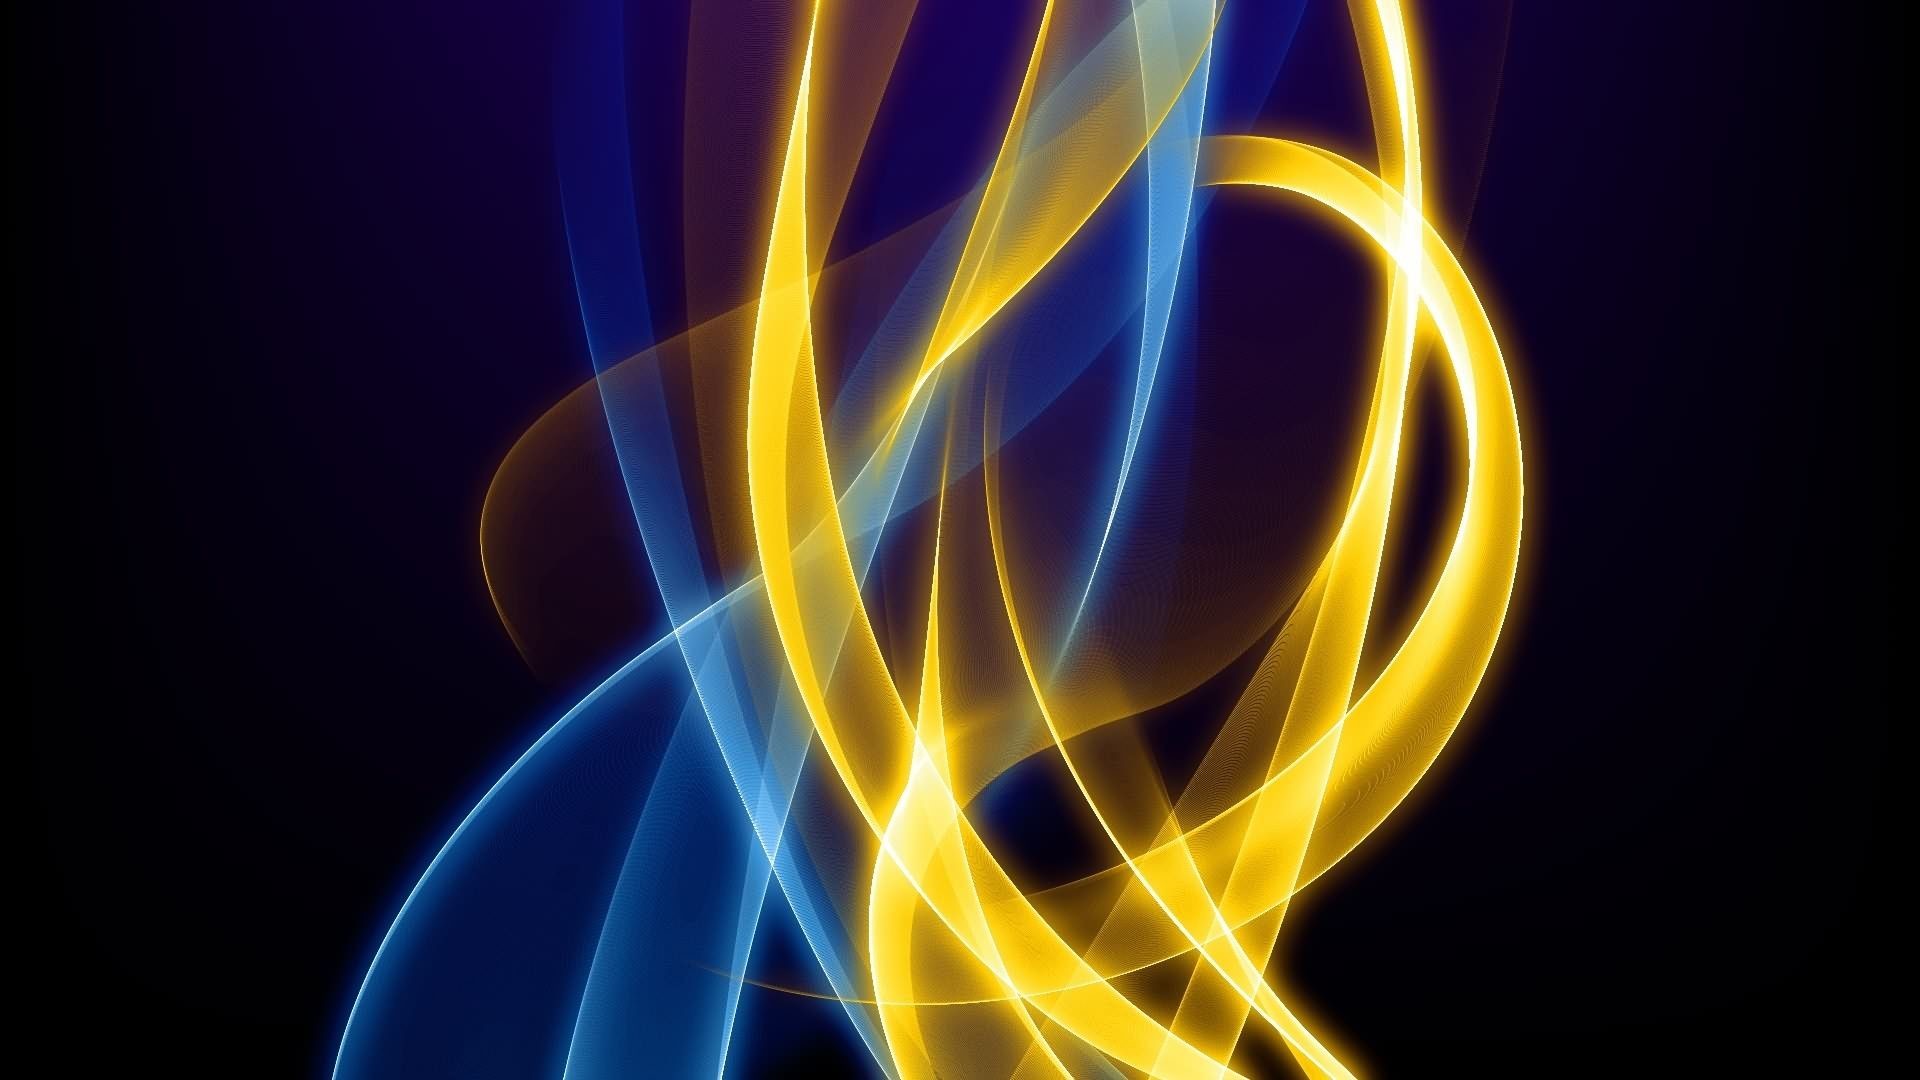 Royal Blue And Gold Wallpaper Data-src - Maize And Blue Background -  1920x1080 Wallpaper 